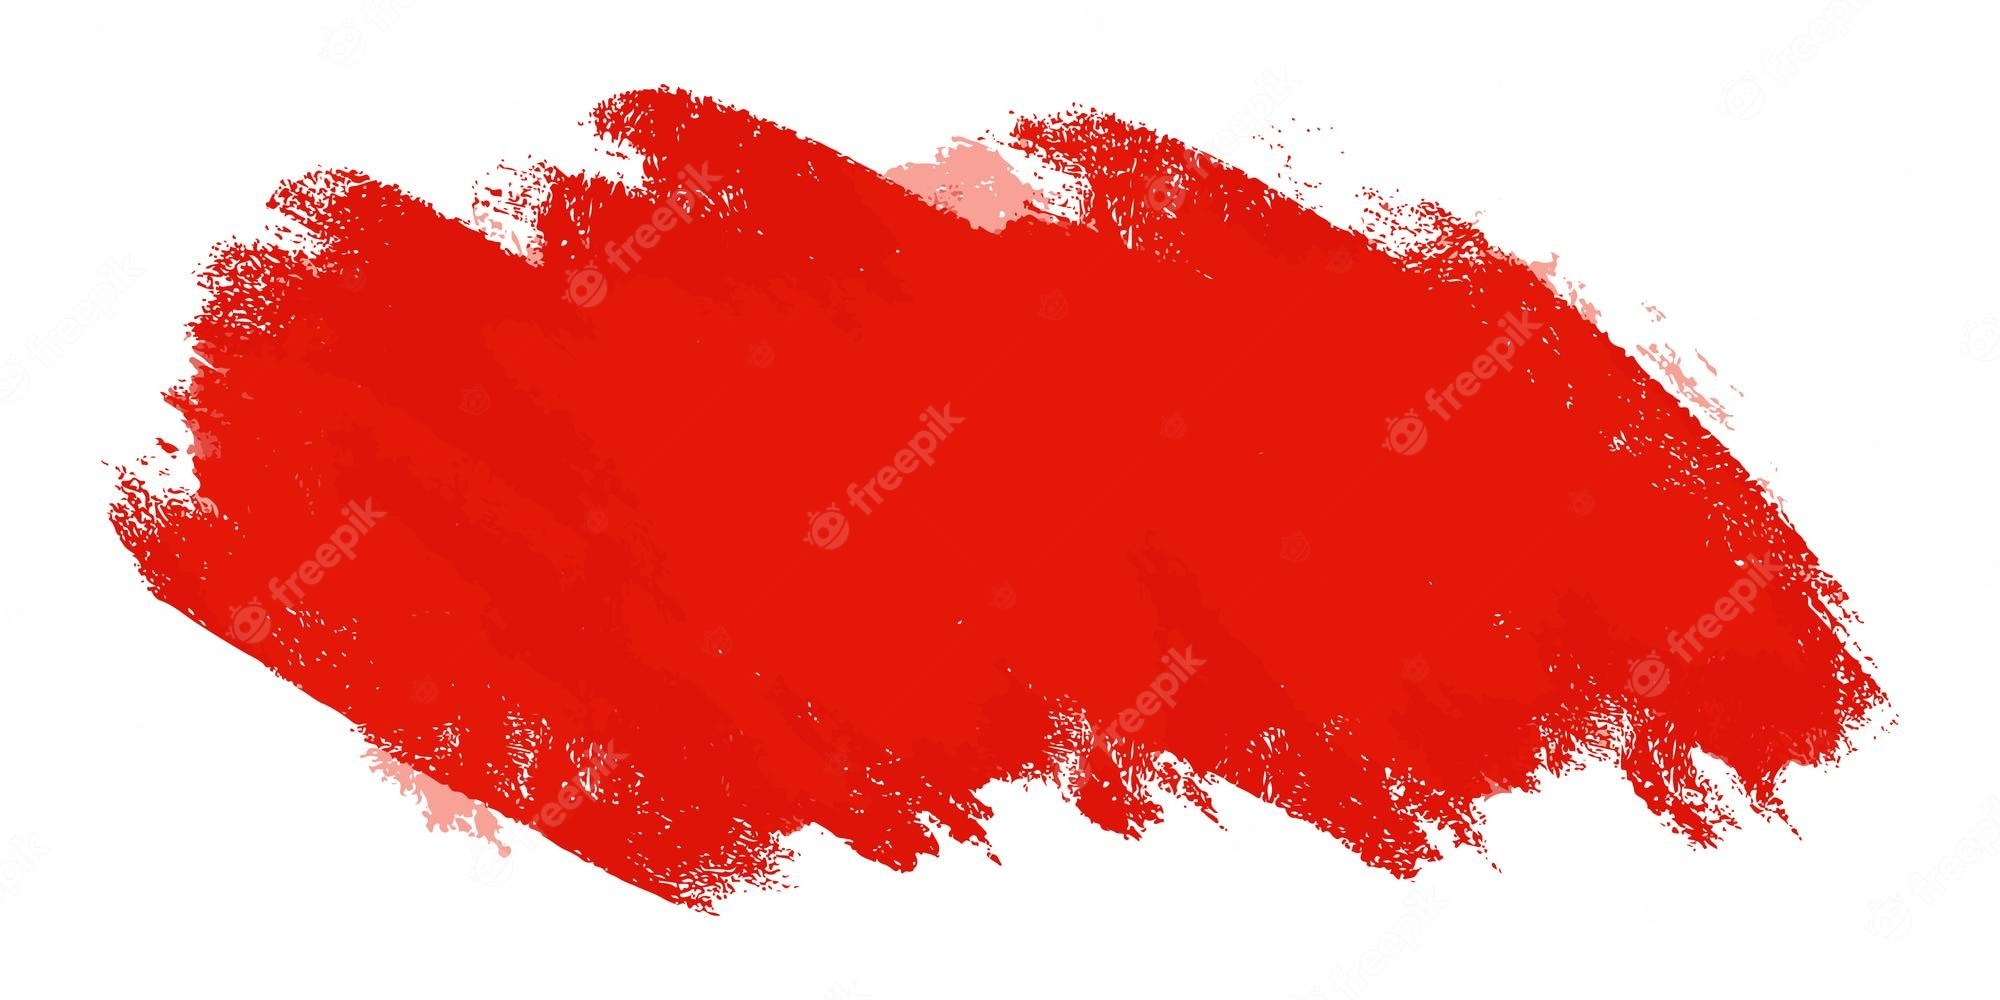 Picture of: Red Brush Images – Free Download on Freepik